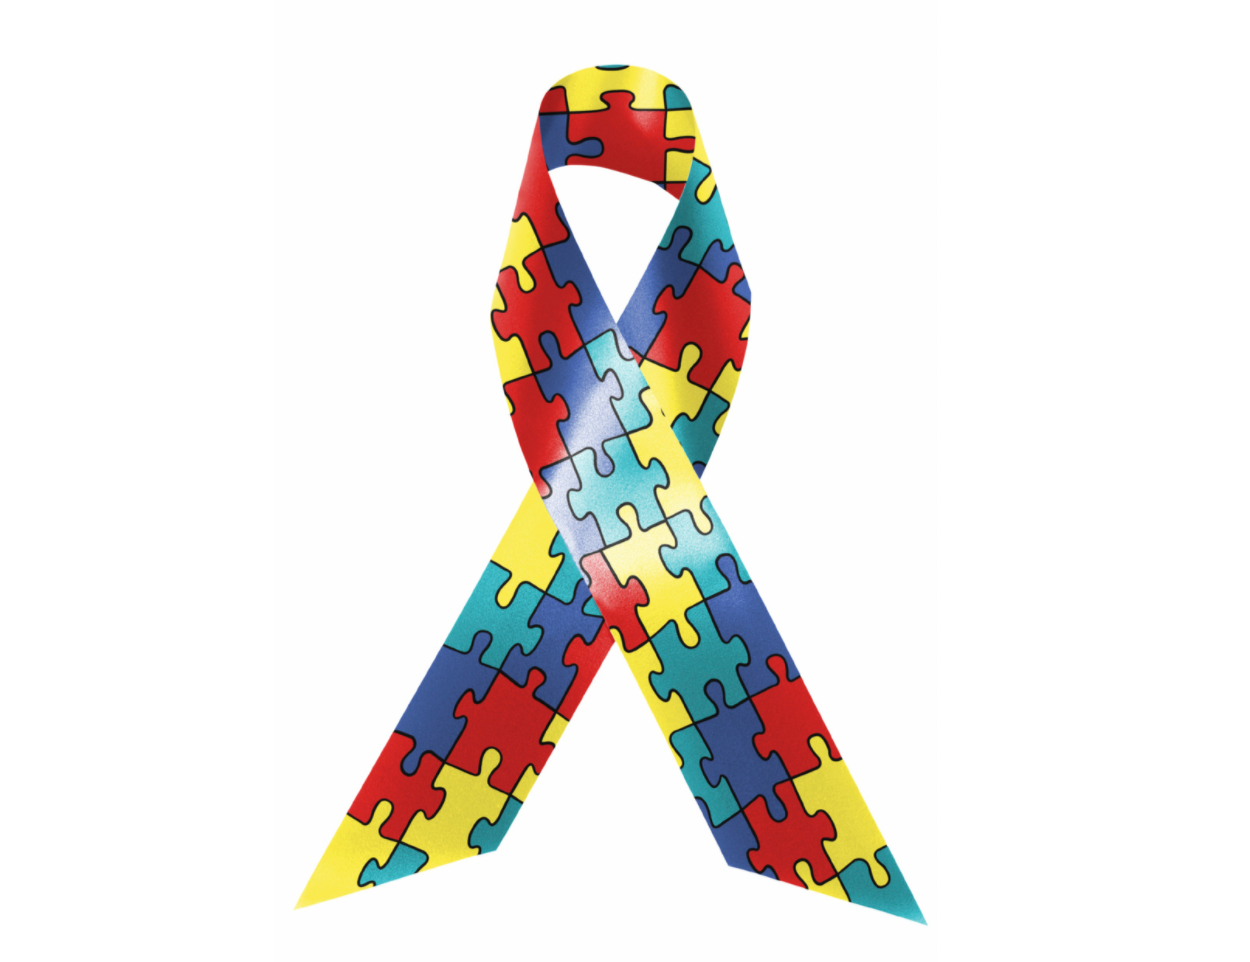 Pharmacy Clinical Pearl of the Day: Autism Disorder